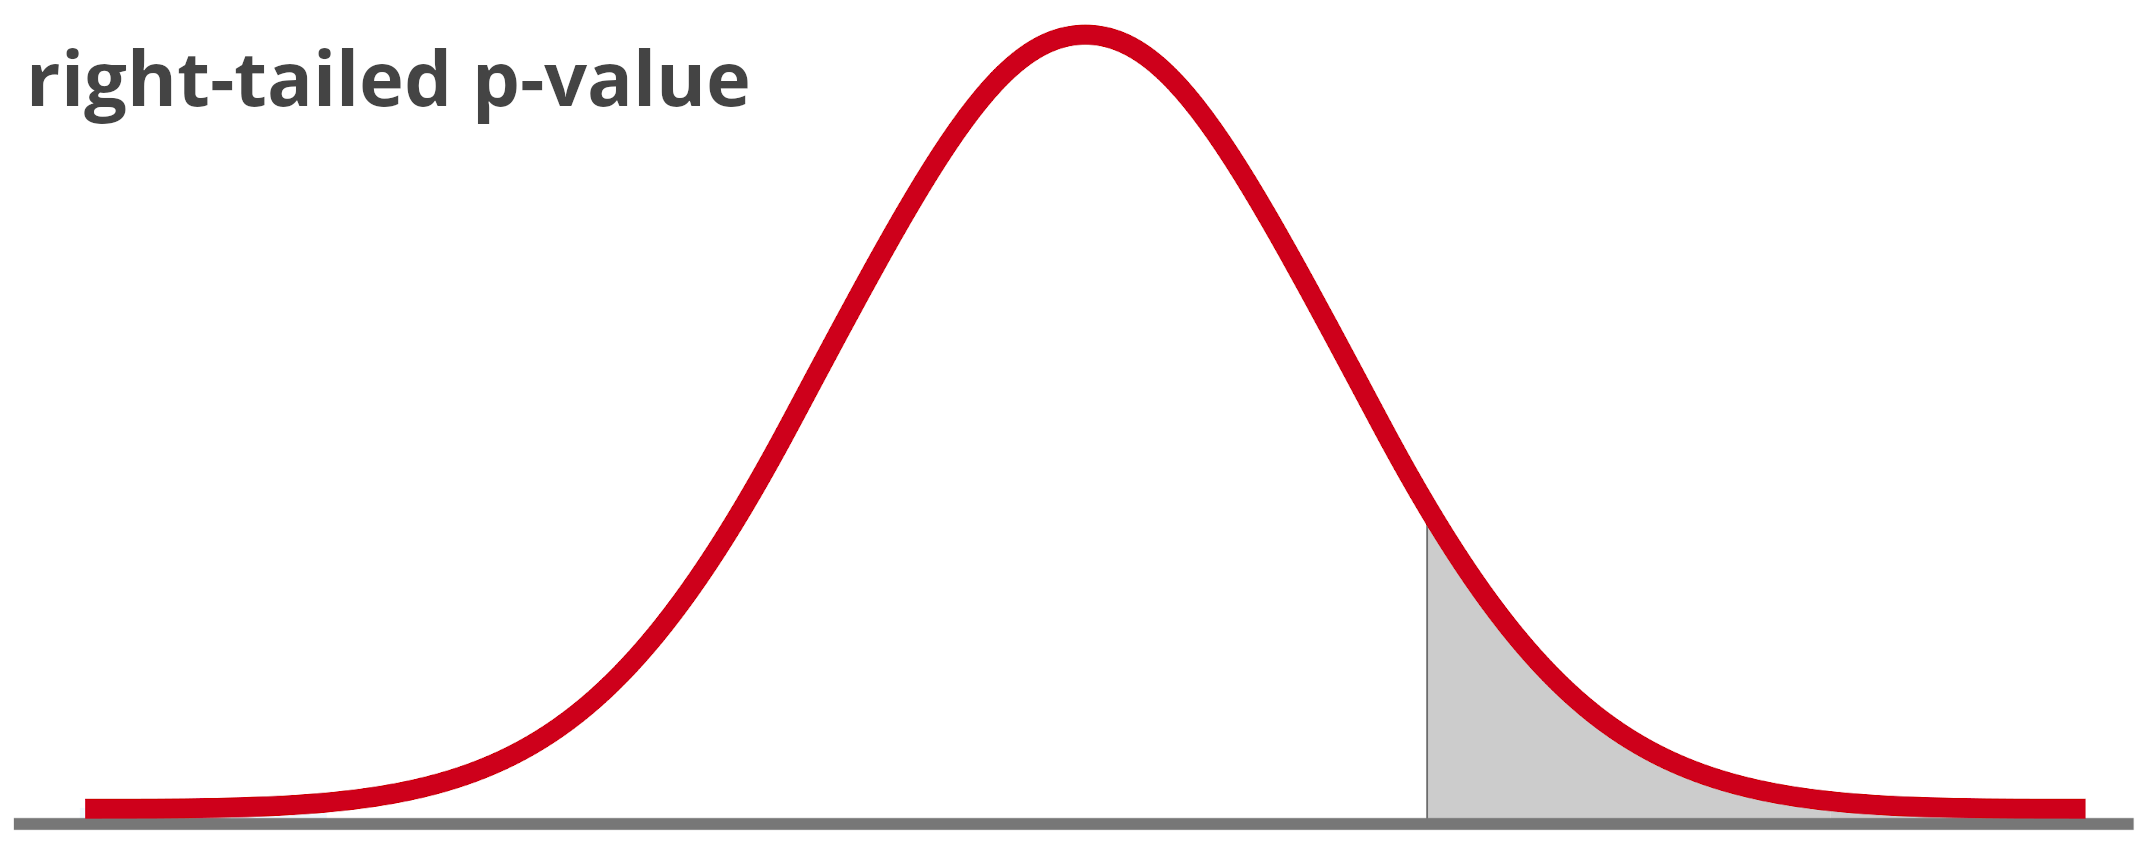 graphic showing a right-tailed p-value for a standard normal distribution